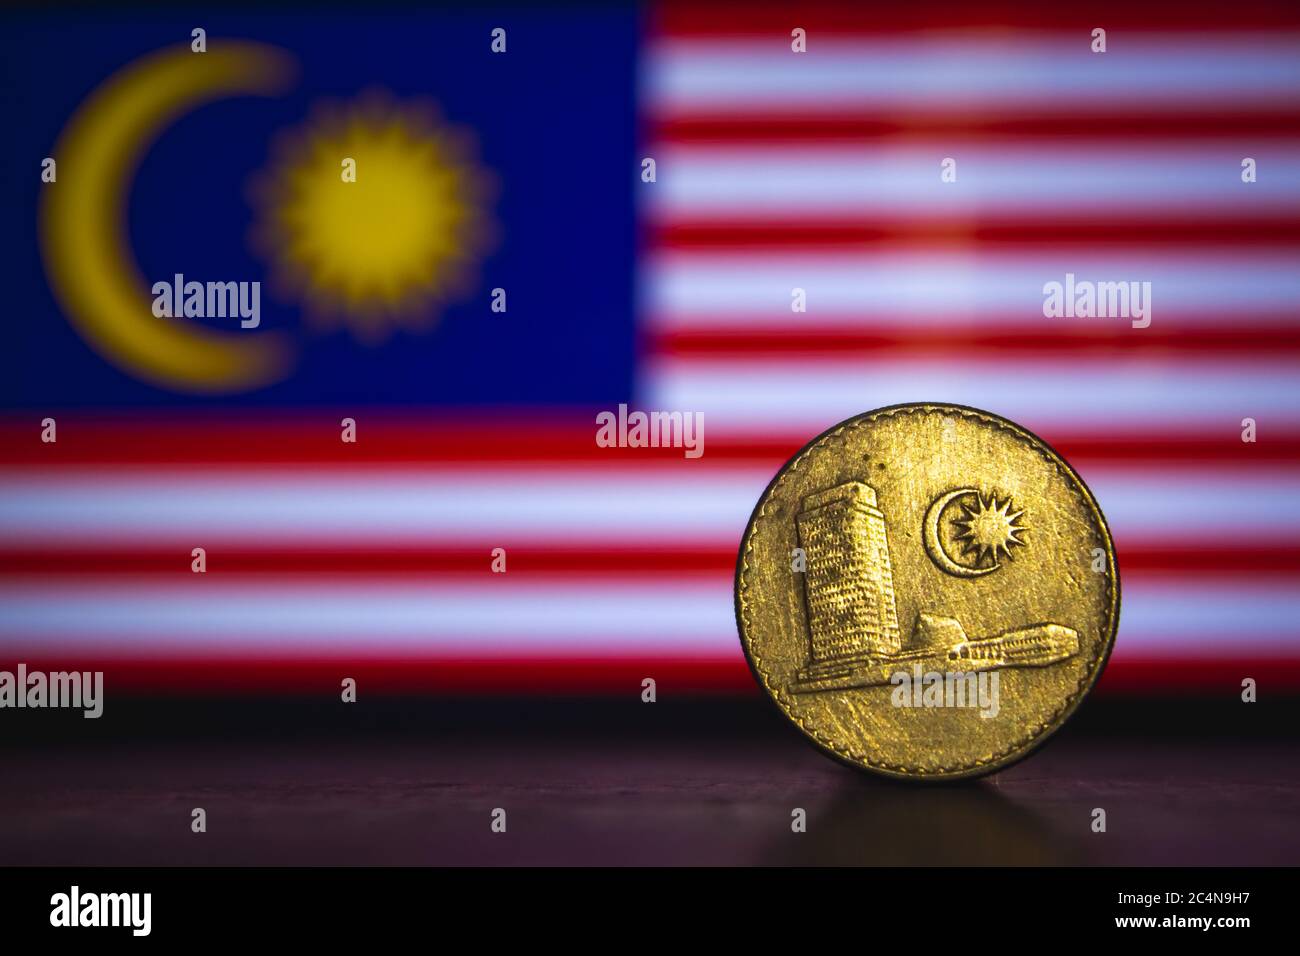 Malaysian coin - Malaysia 20 Sen 1973 coin isolated on malaysia flag background. Malaysian currency twenty sen coin with space for text copy. Stock Photo